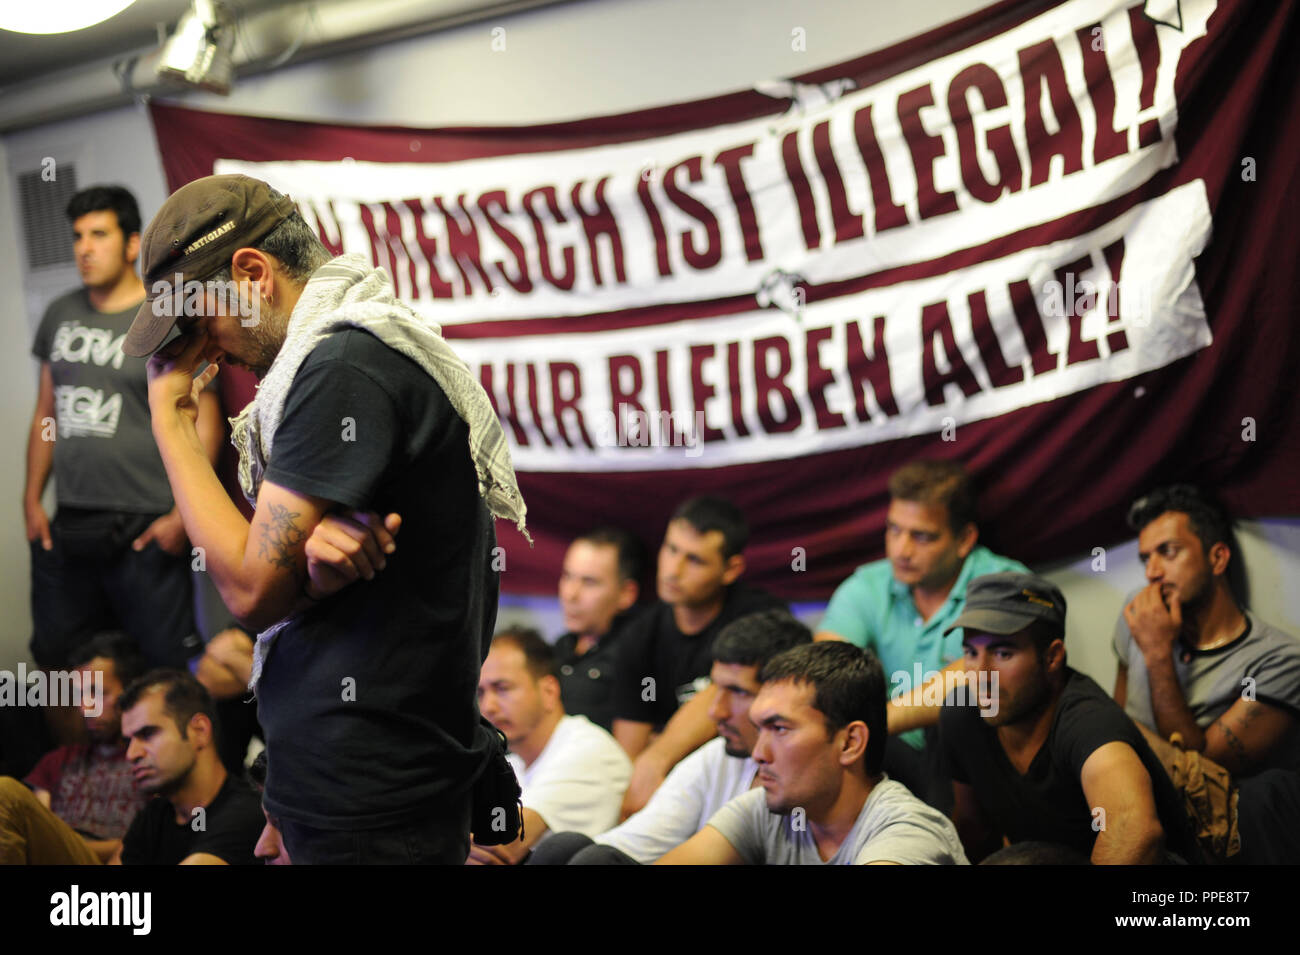 Matthias Jena (not in the picture), the Chairman of the Confederation of German Trade Unions (DGB) Bavaria, presents a compromise offer to the asylum seekers in the Munich DGB headquarters to withdraw from the premises in the Schwanthalerstrasse, where they had been temporarily  accommodated following a protest march through Bavaria. Stock Photo